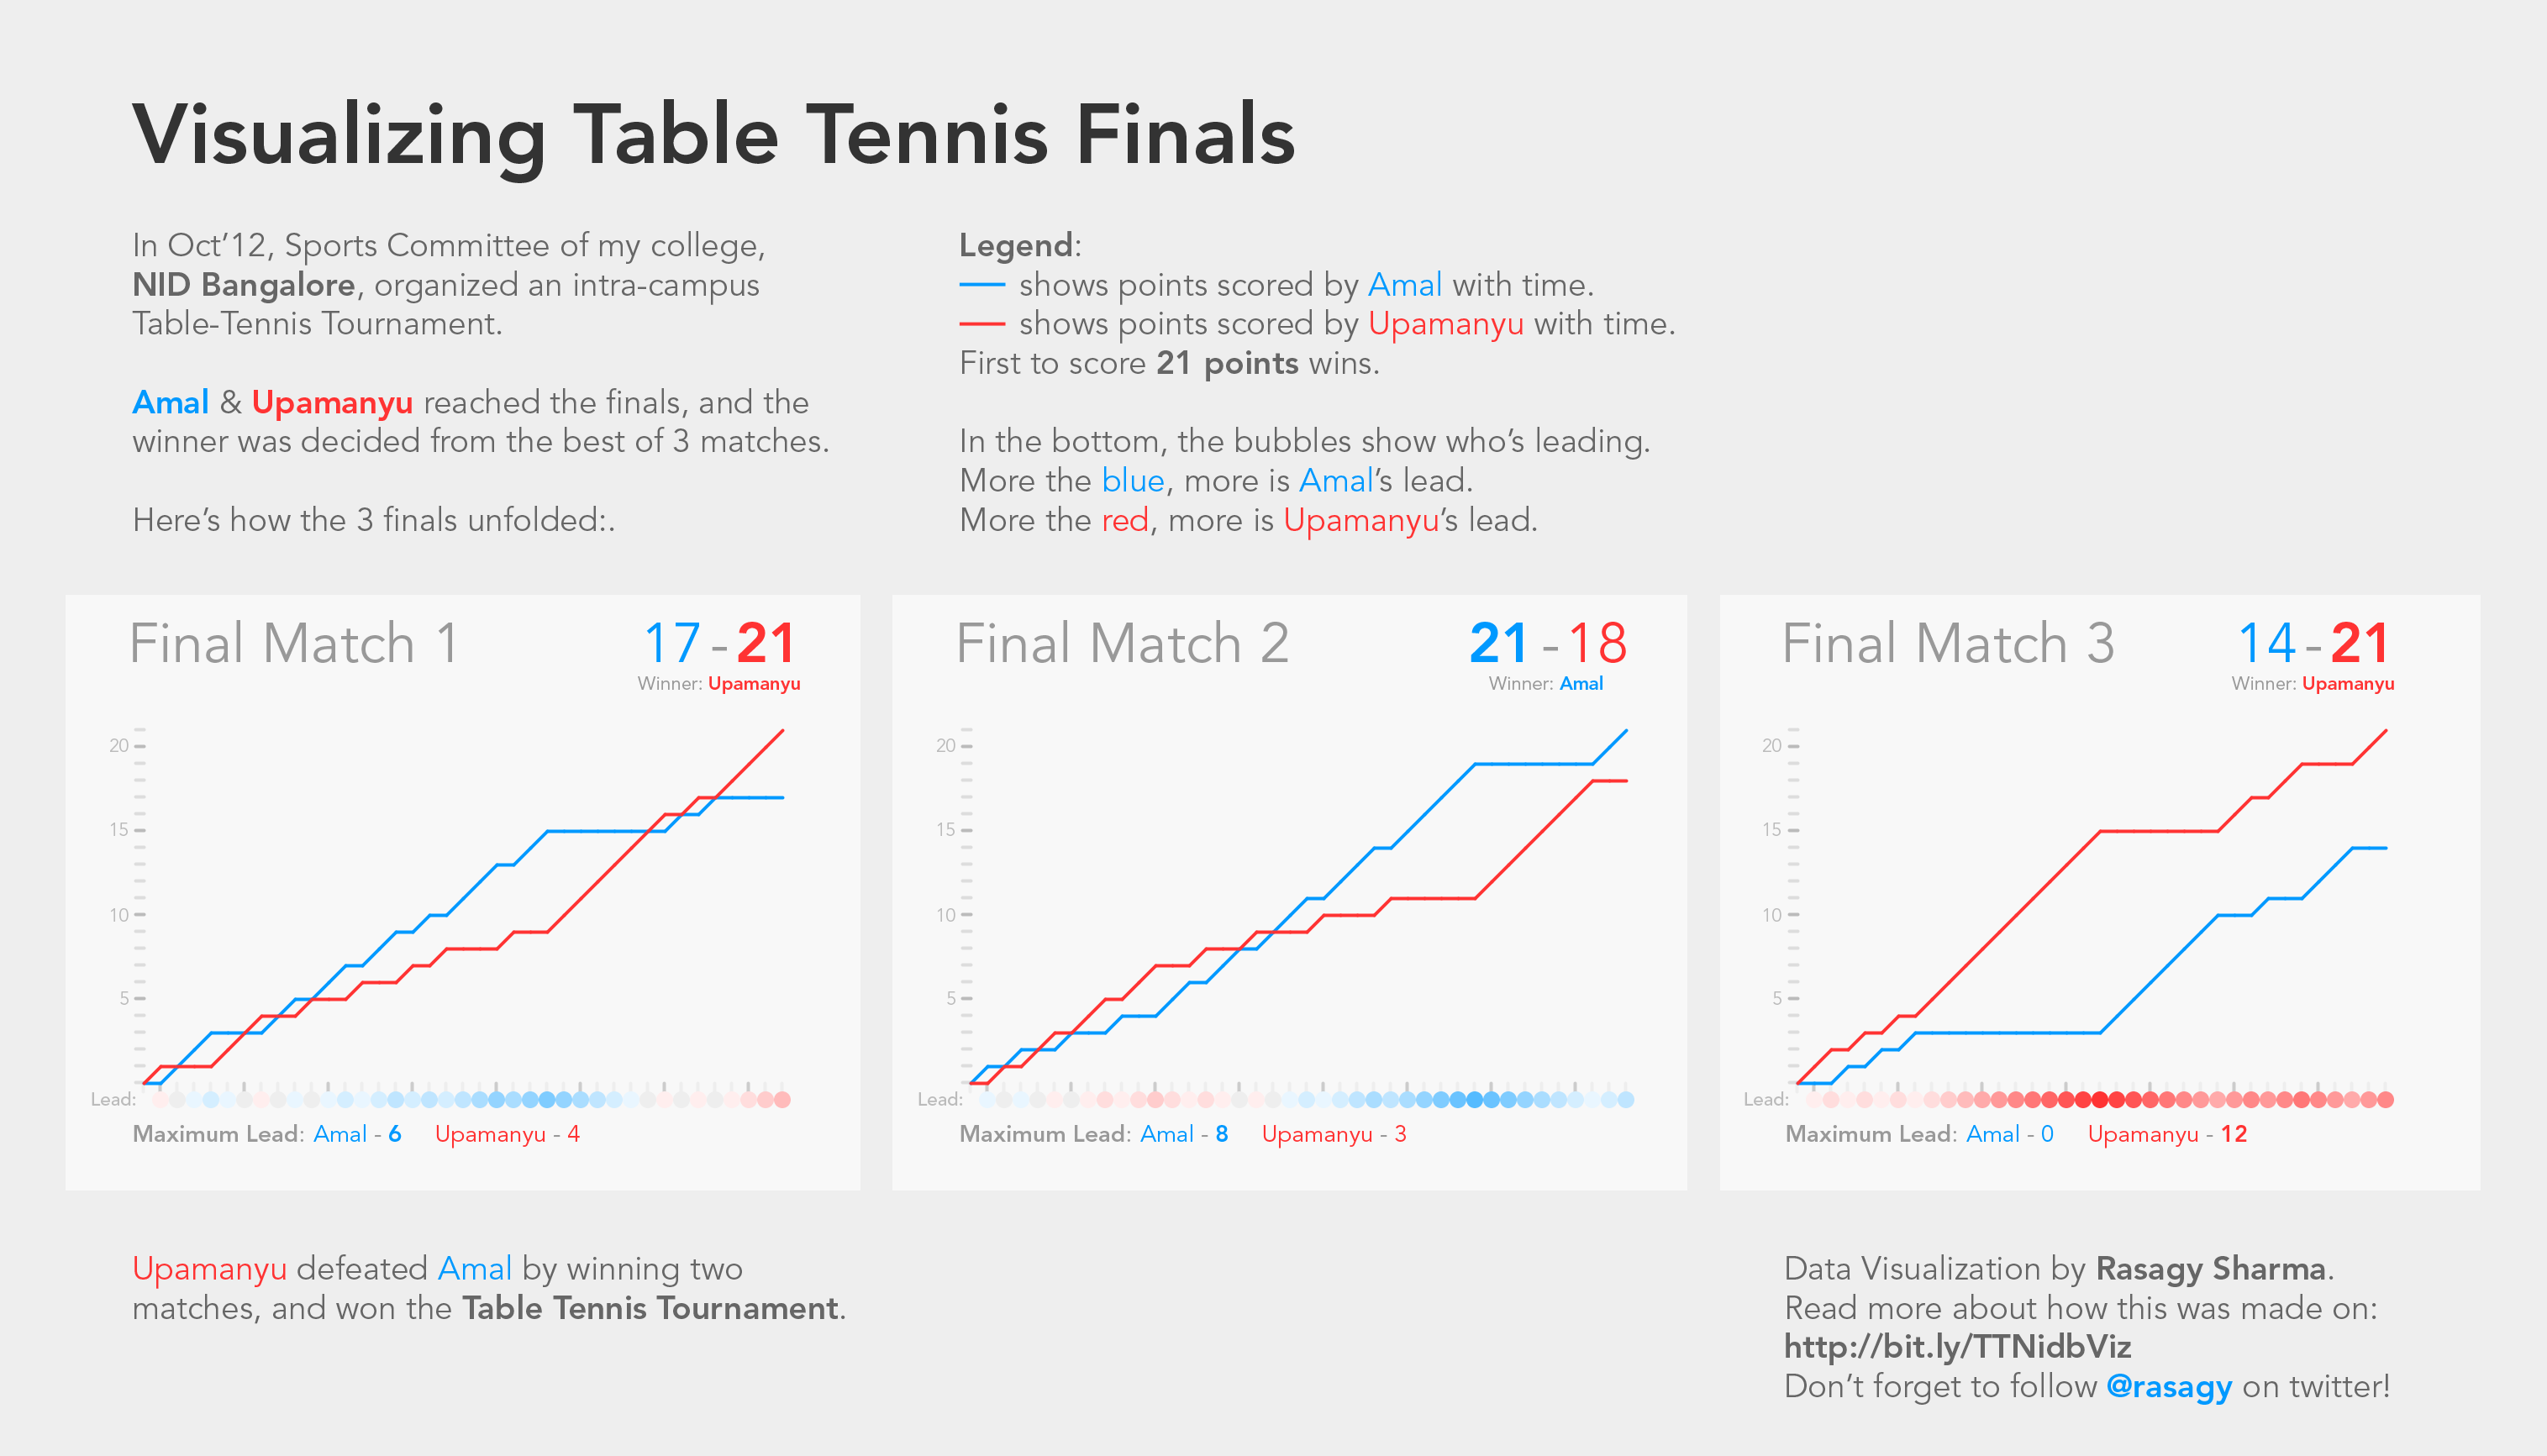 Final visualization of Table Tennis Finals